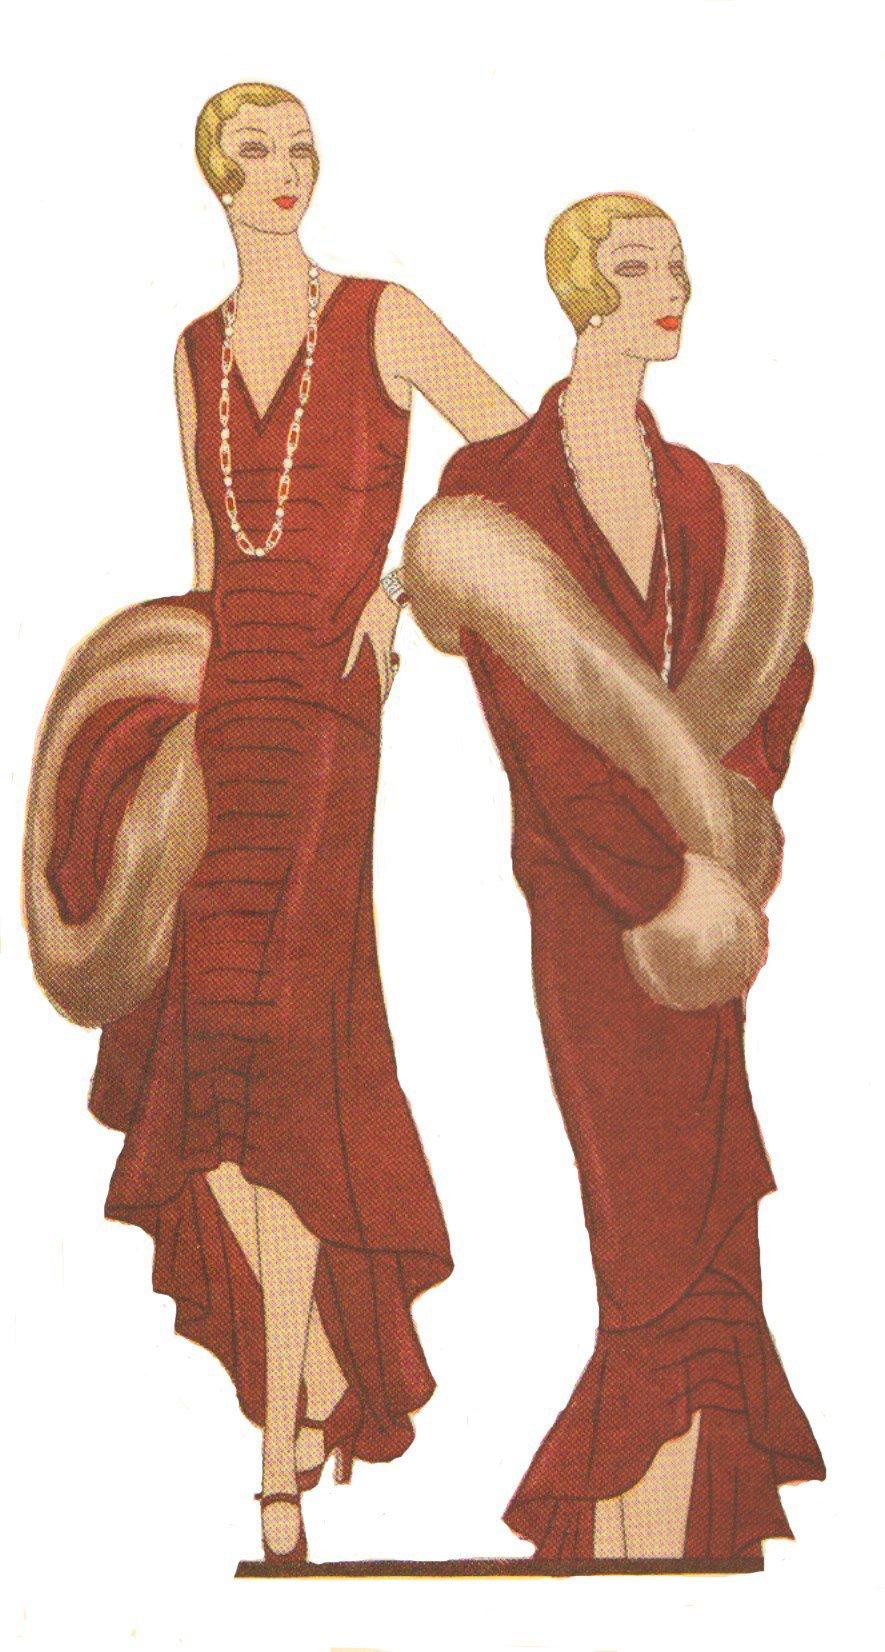 Shown is a red velvet dress and wrap with a fur collar and cuffs, Pattern #2495.